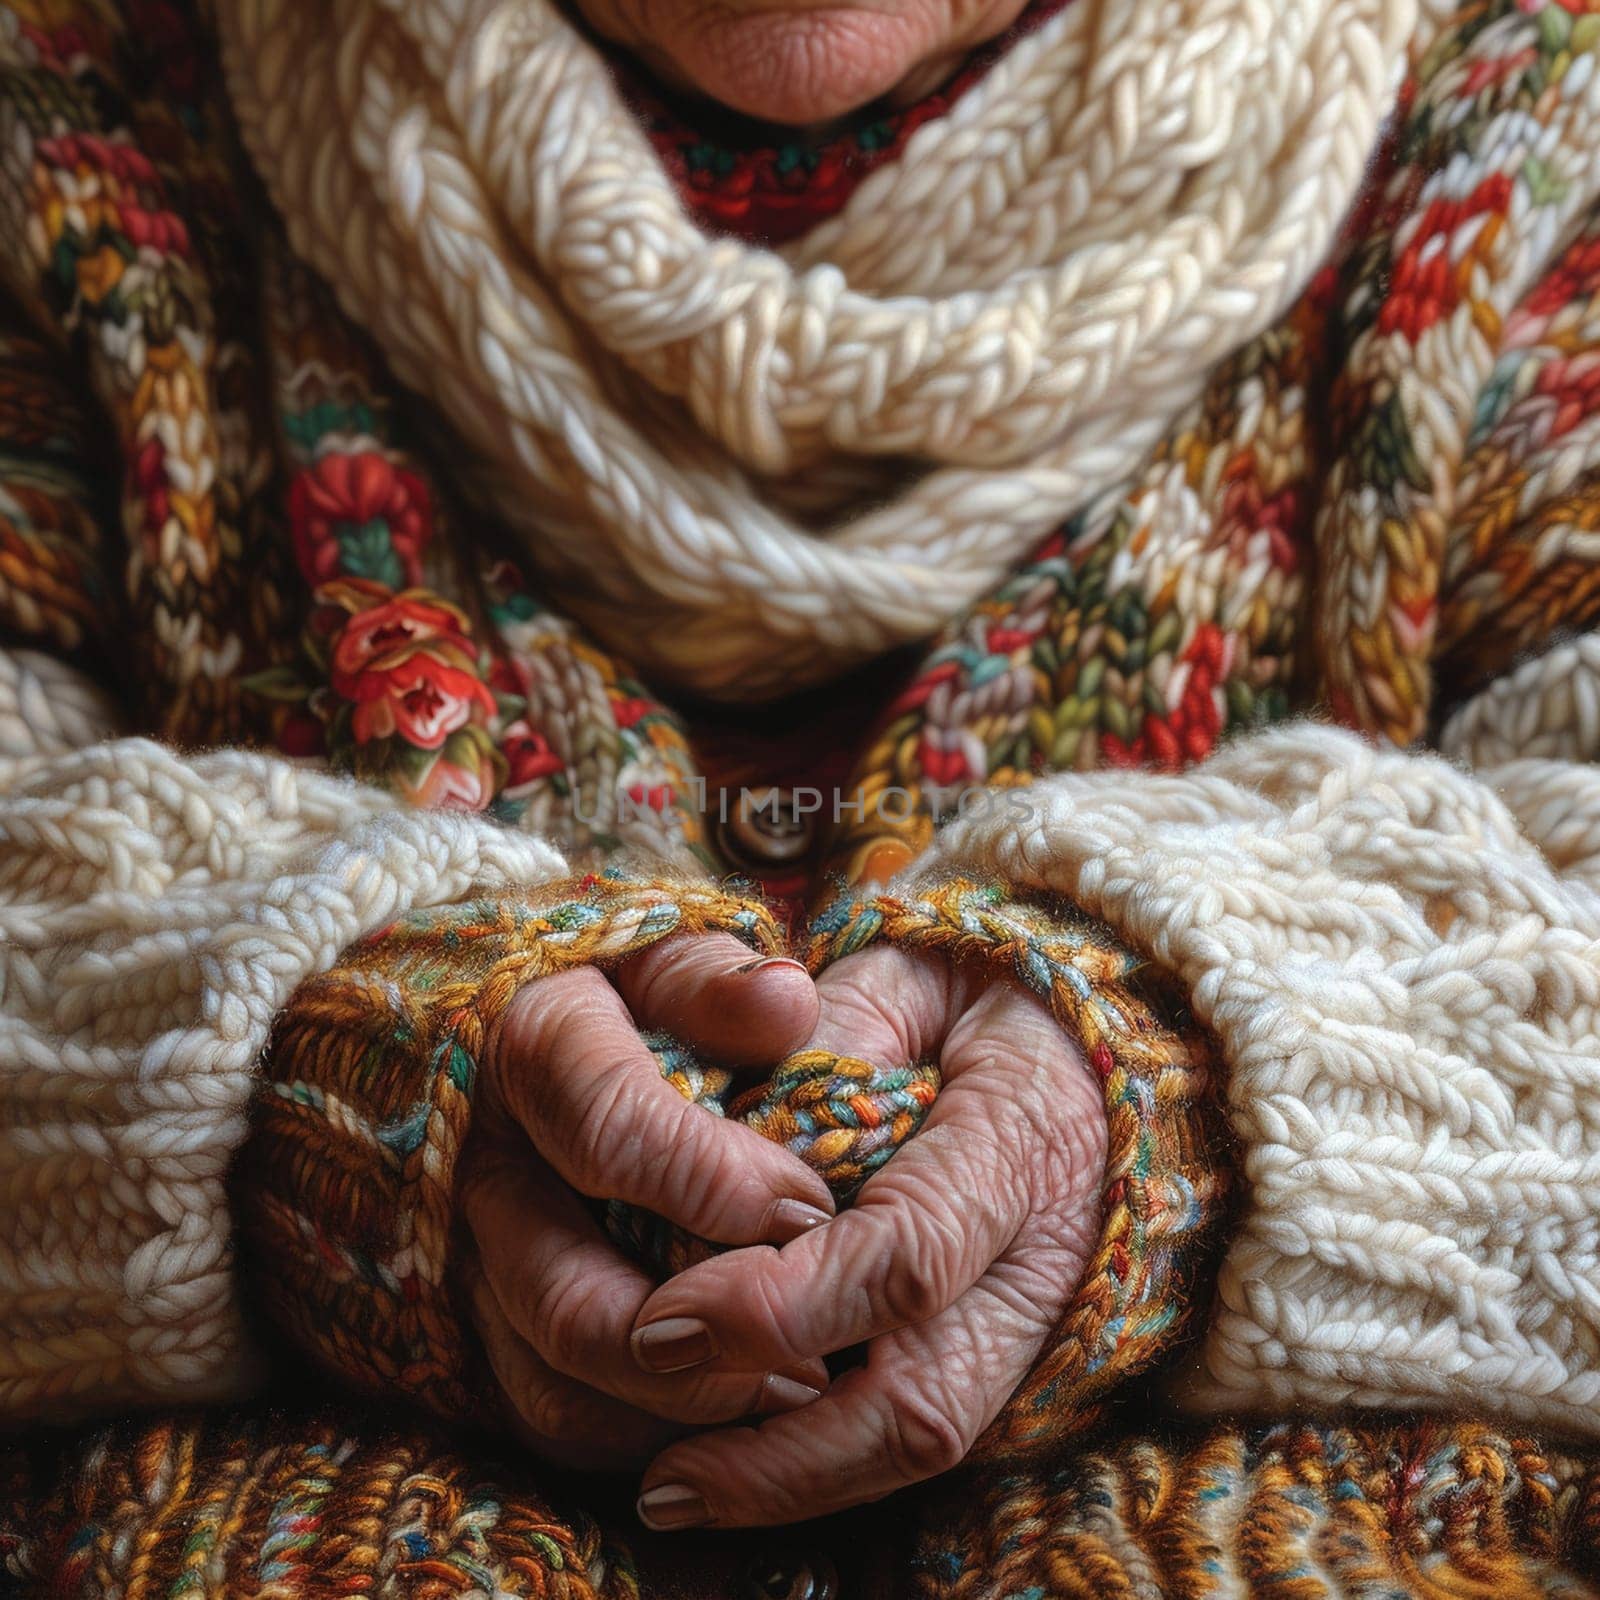 Fingers entwined in knitting, illustrating the craft and comfort of creating.